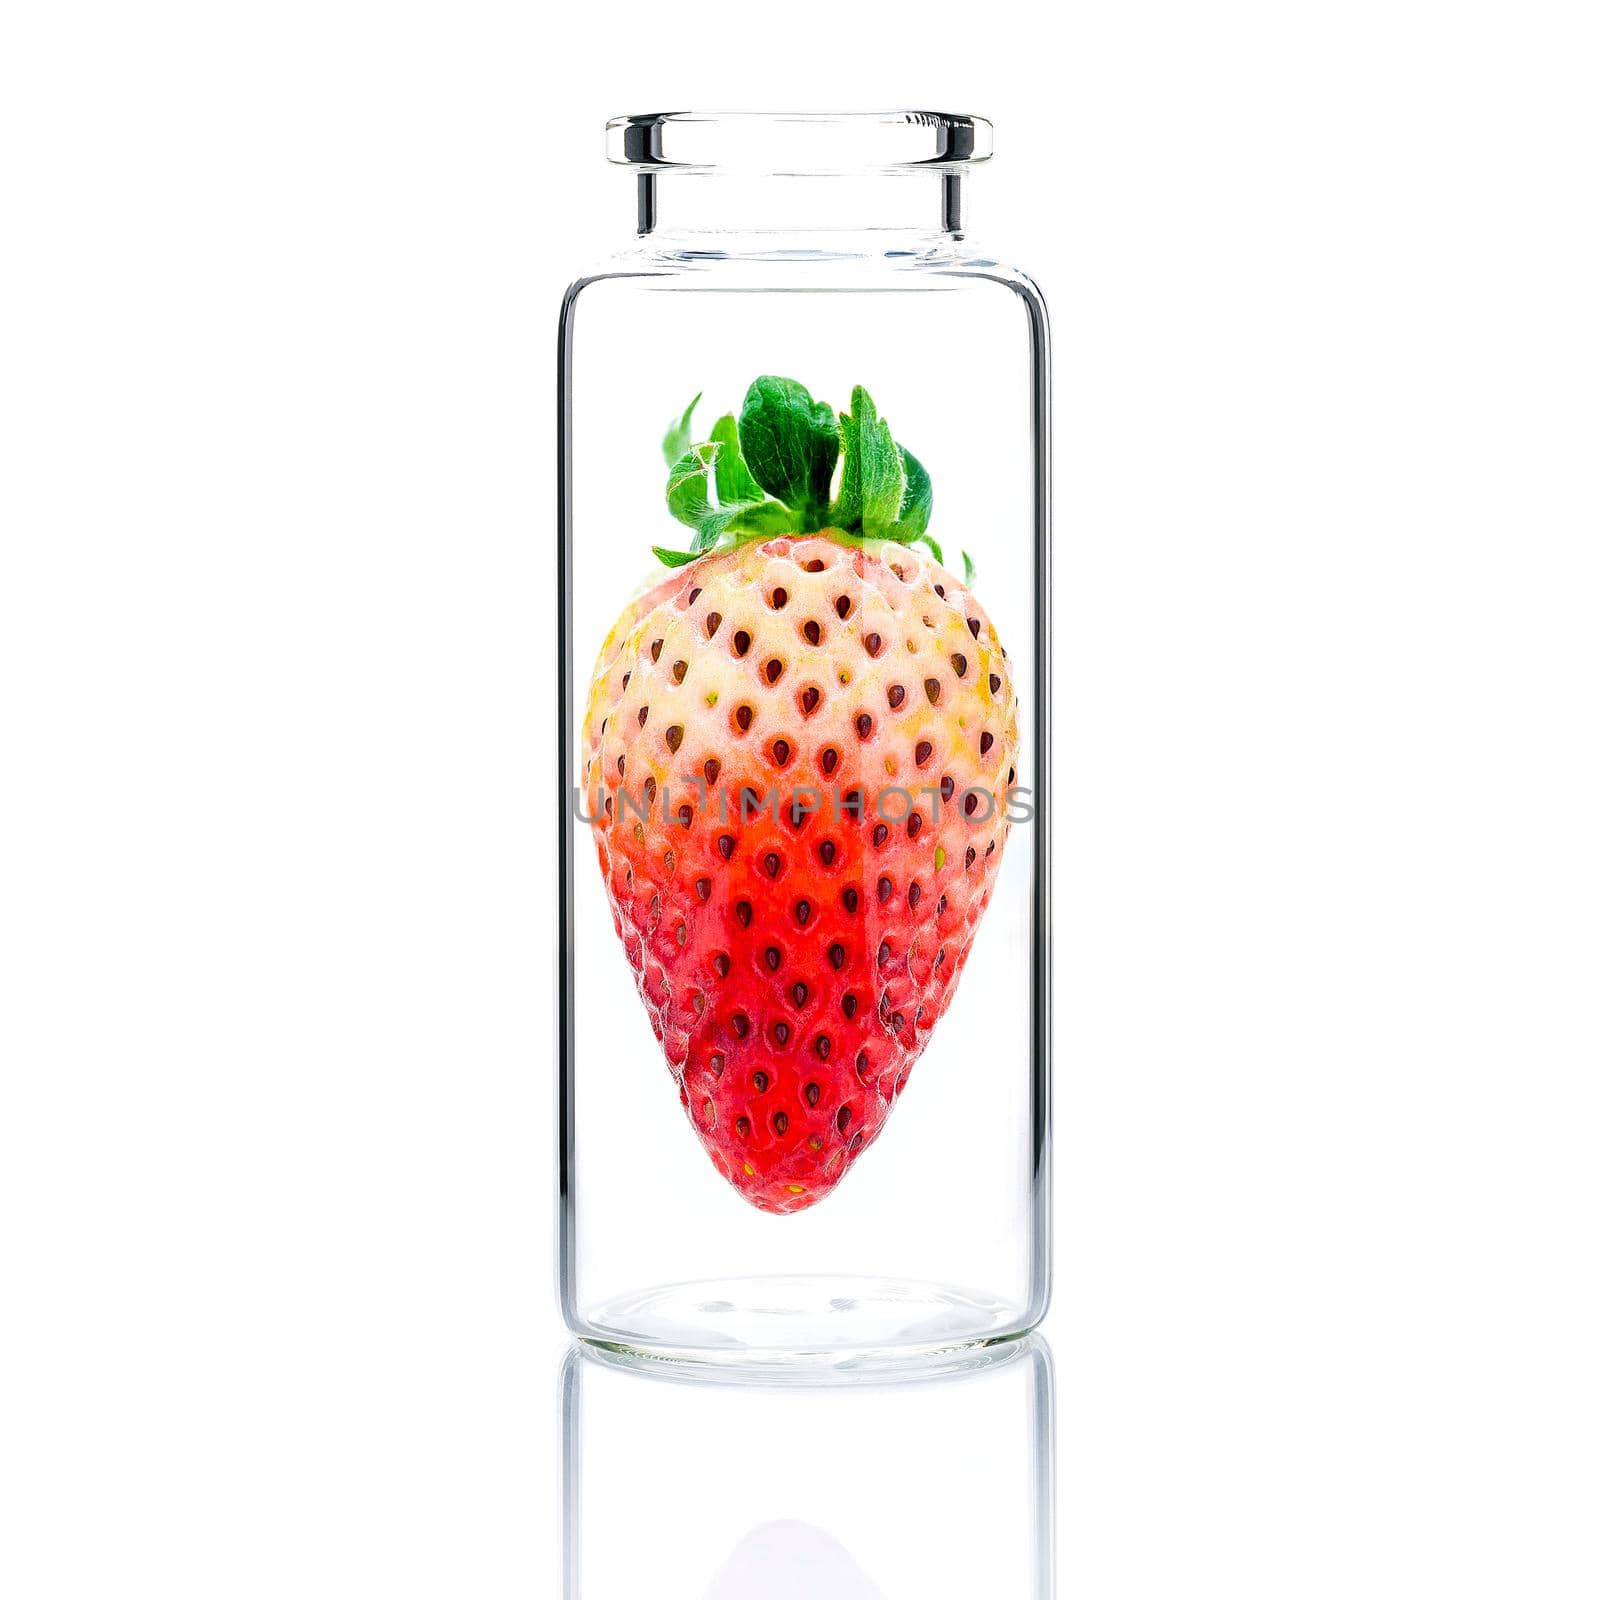 Homemade skin care with fresh strawberry in a glass bottle isolated on white background.